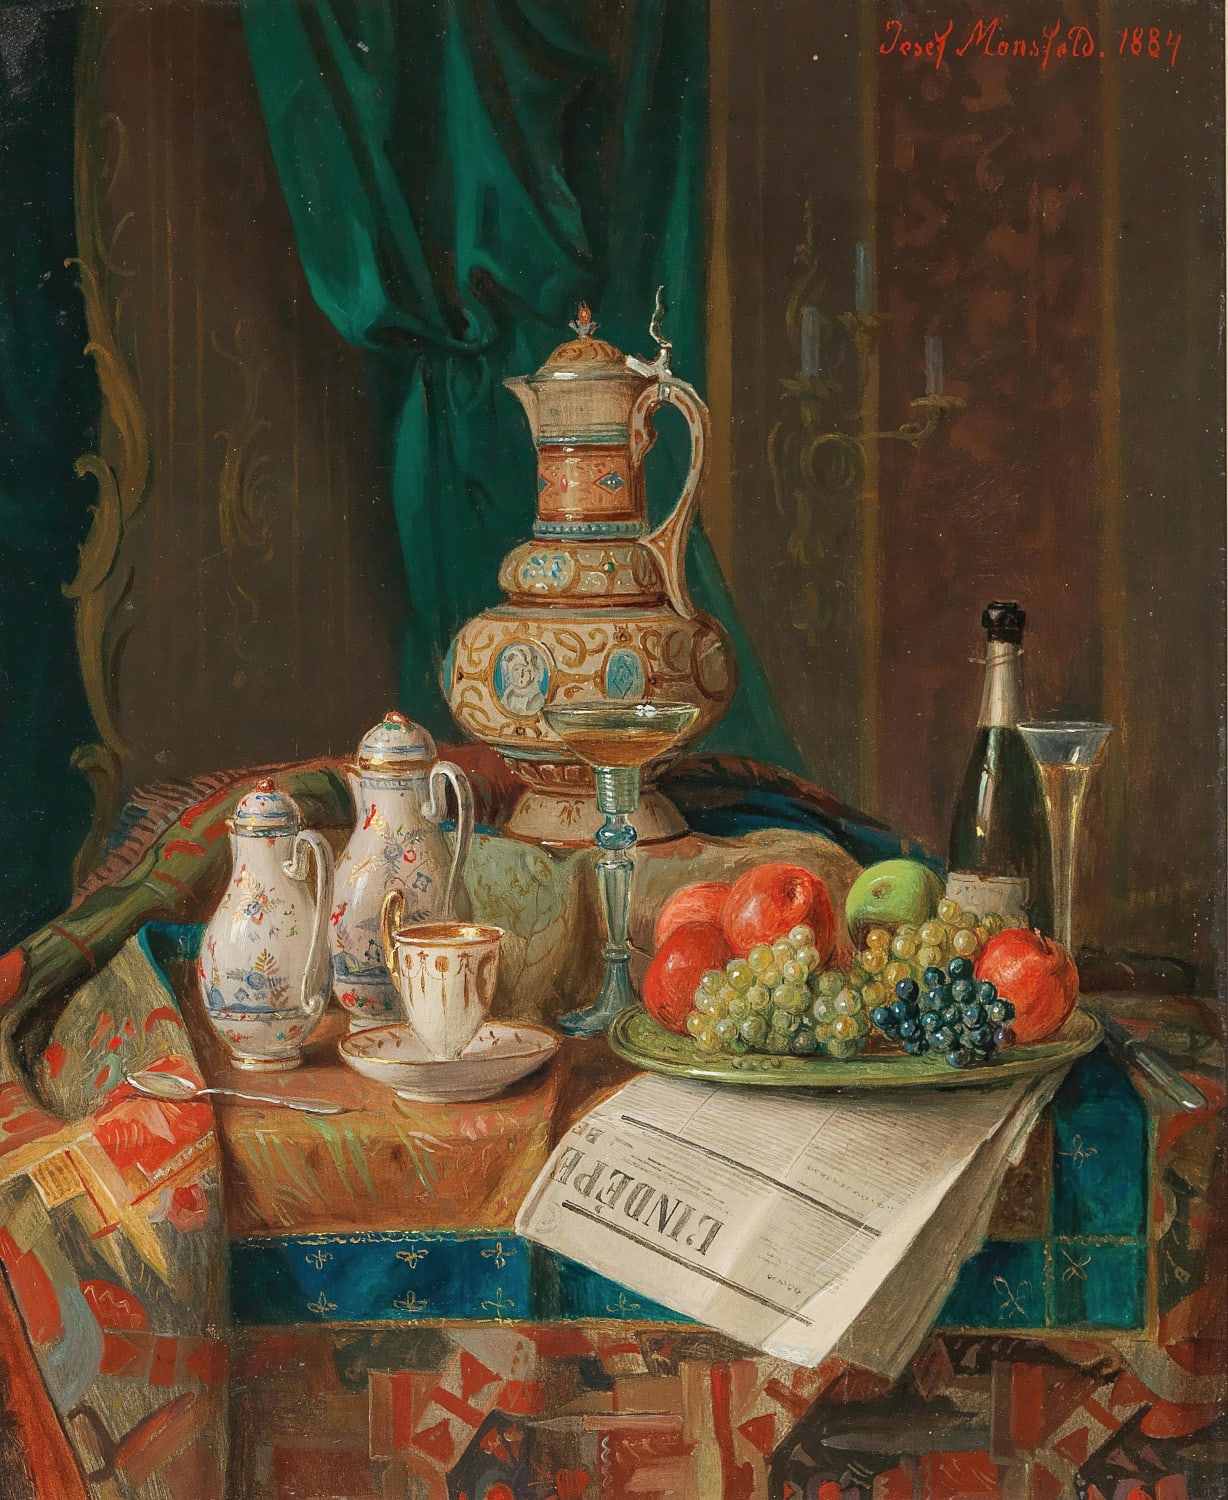 Josef Mansfeld - Still Life with a Historicist Ewer, a Plate of Fruit and a Newspaper (1884)